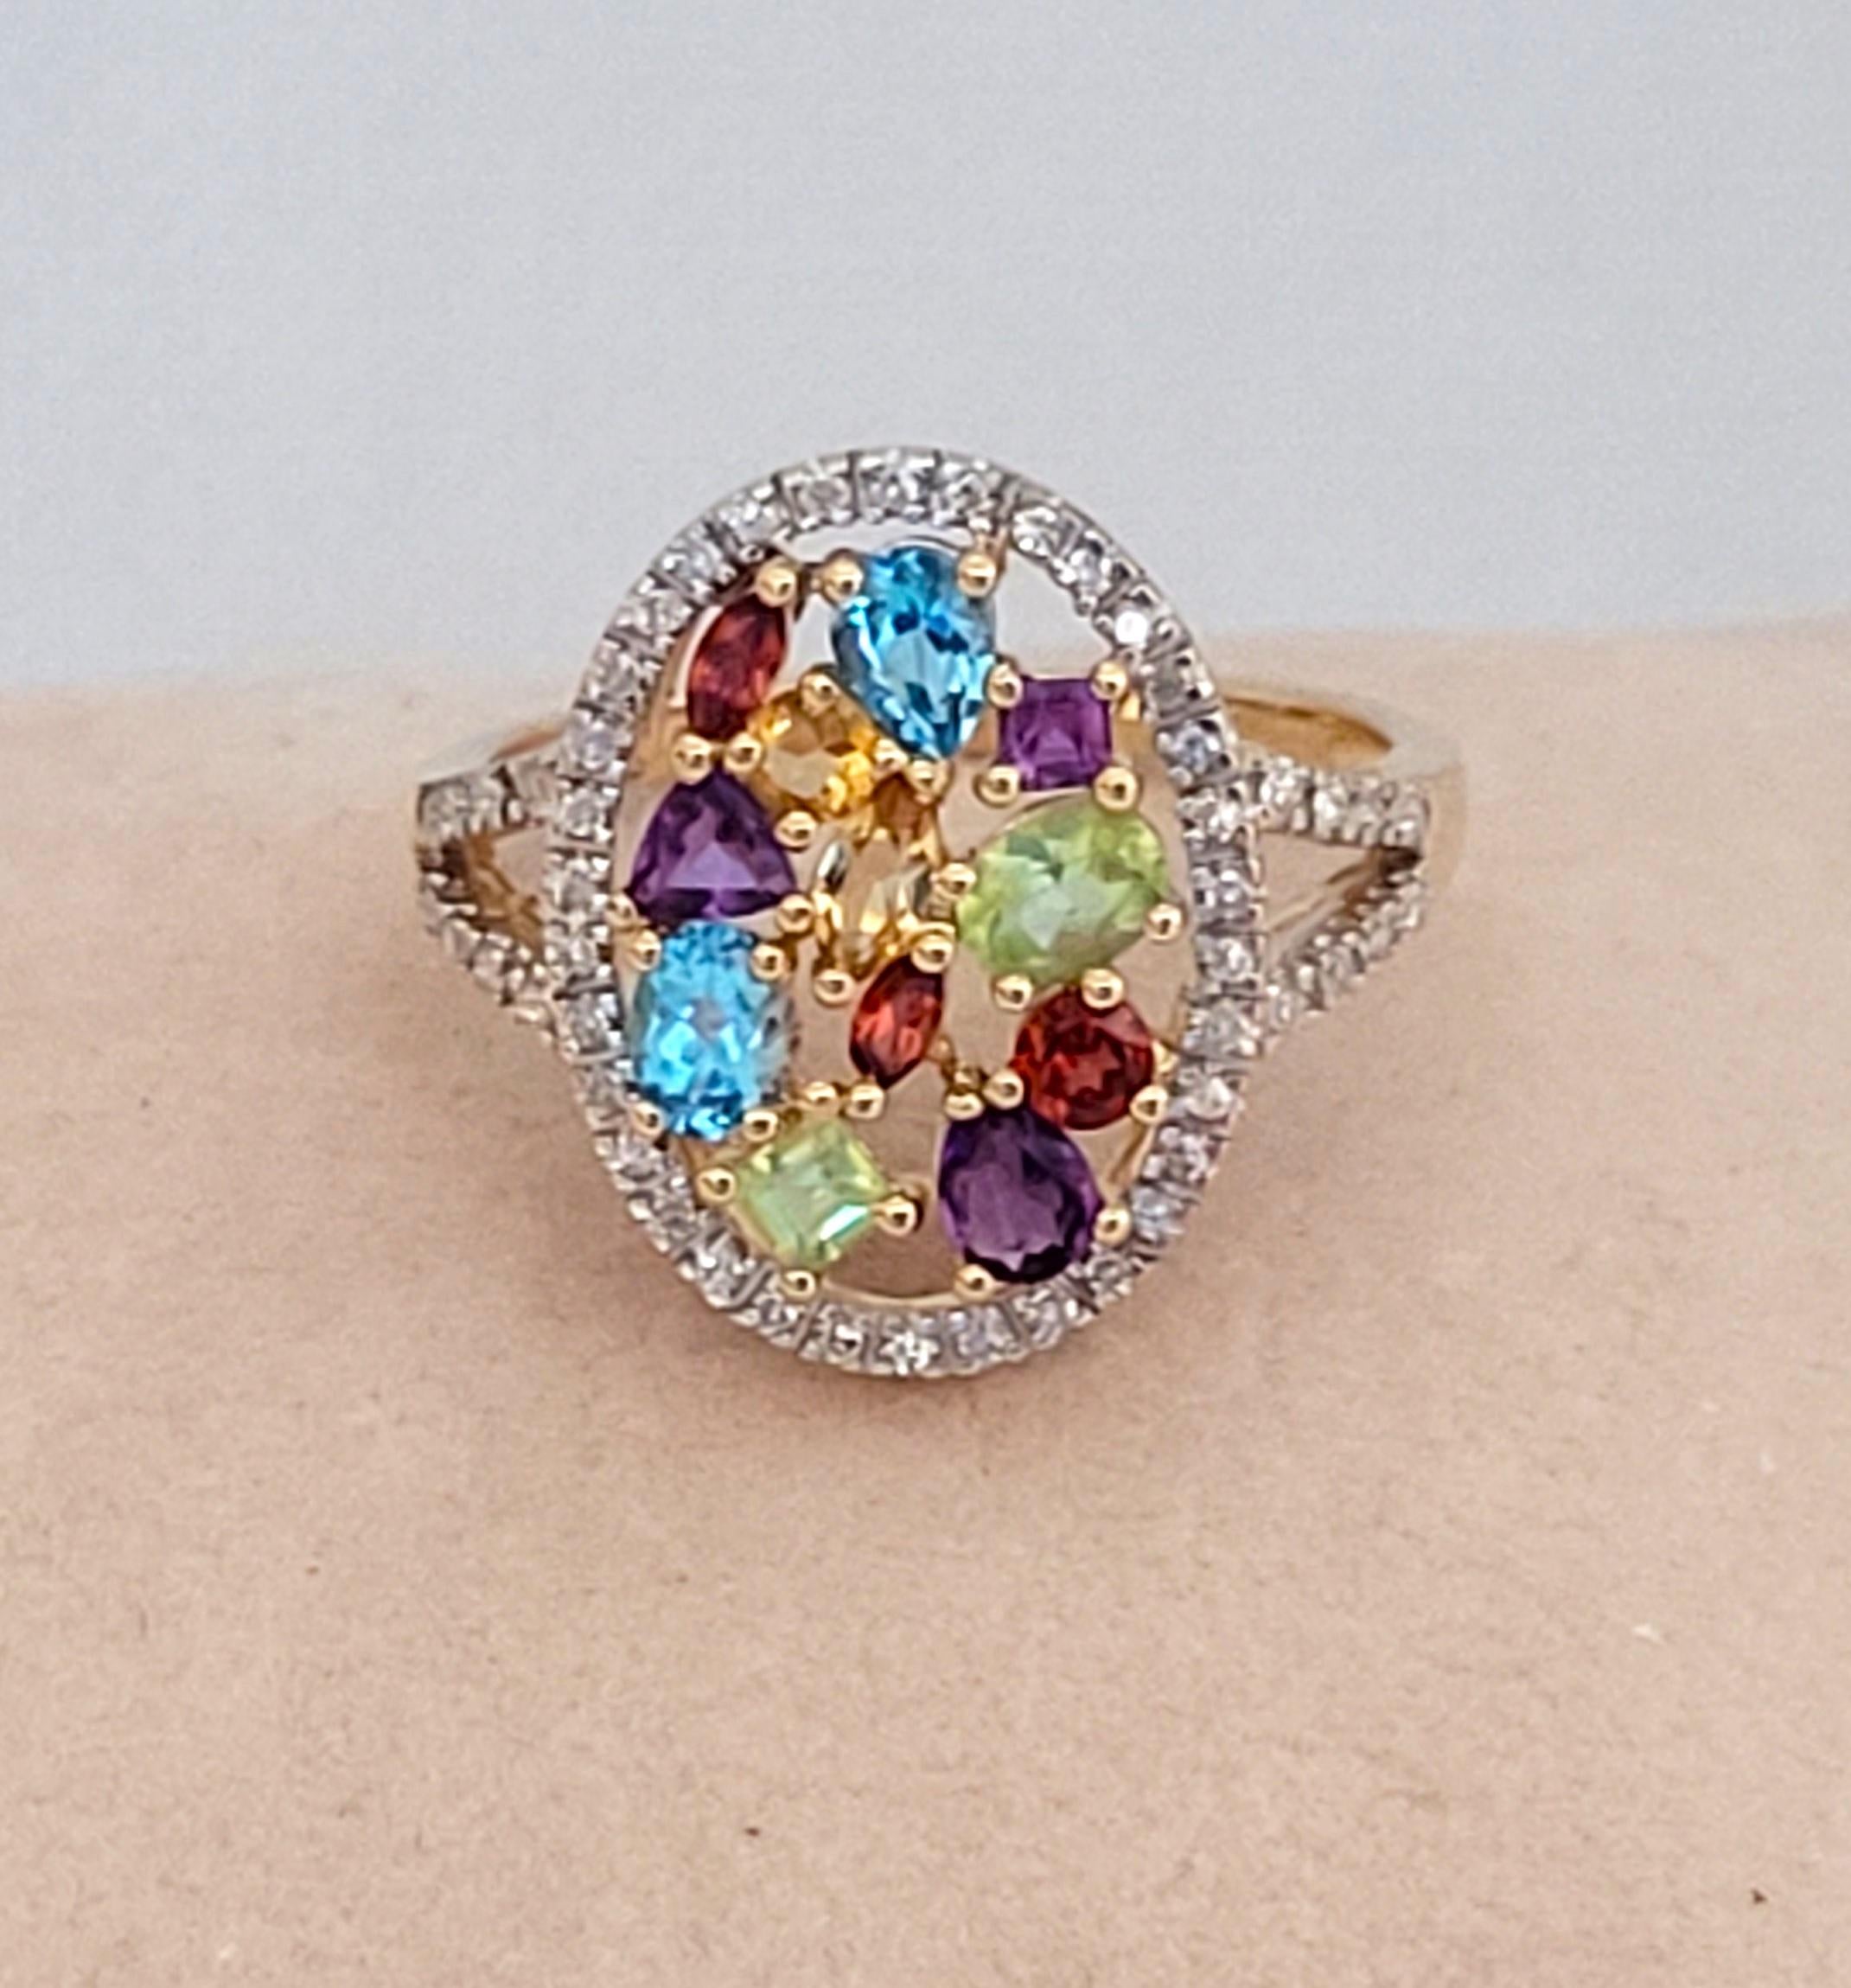 Beautiful 14kt yellow gold ring with round brilliant diamonds and multi-colored gemstones, topaz, citrine, peridot, garnet, and amethyst. The gemstone shapes are pear, marquis, trillion, round, princess cut, and oval. The round brilliant diamonds of